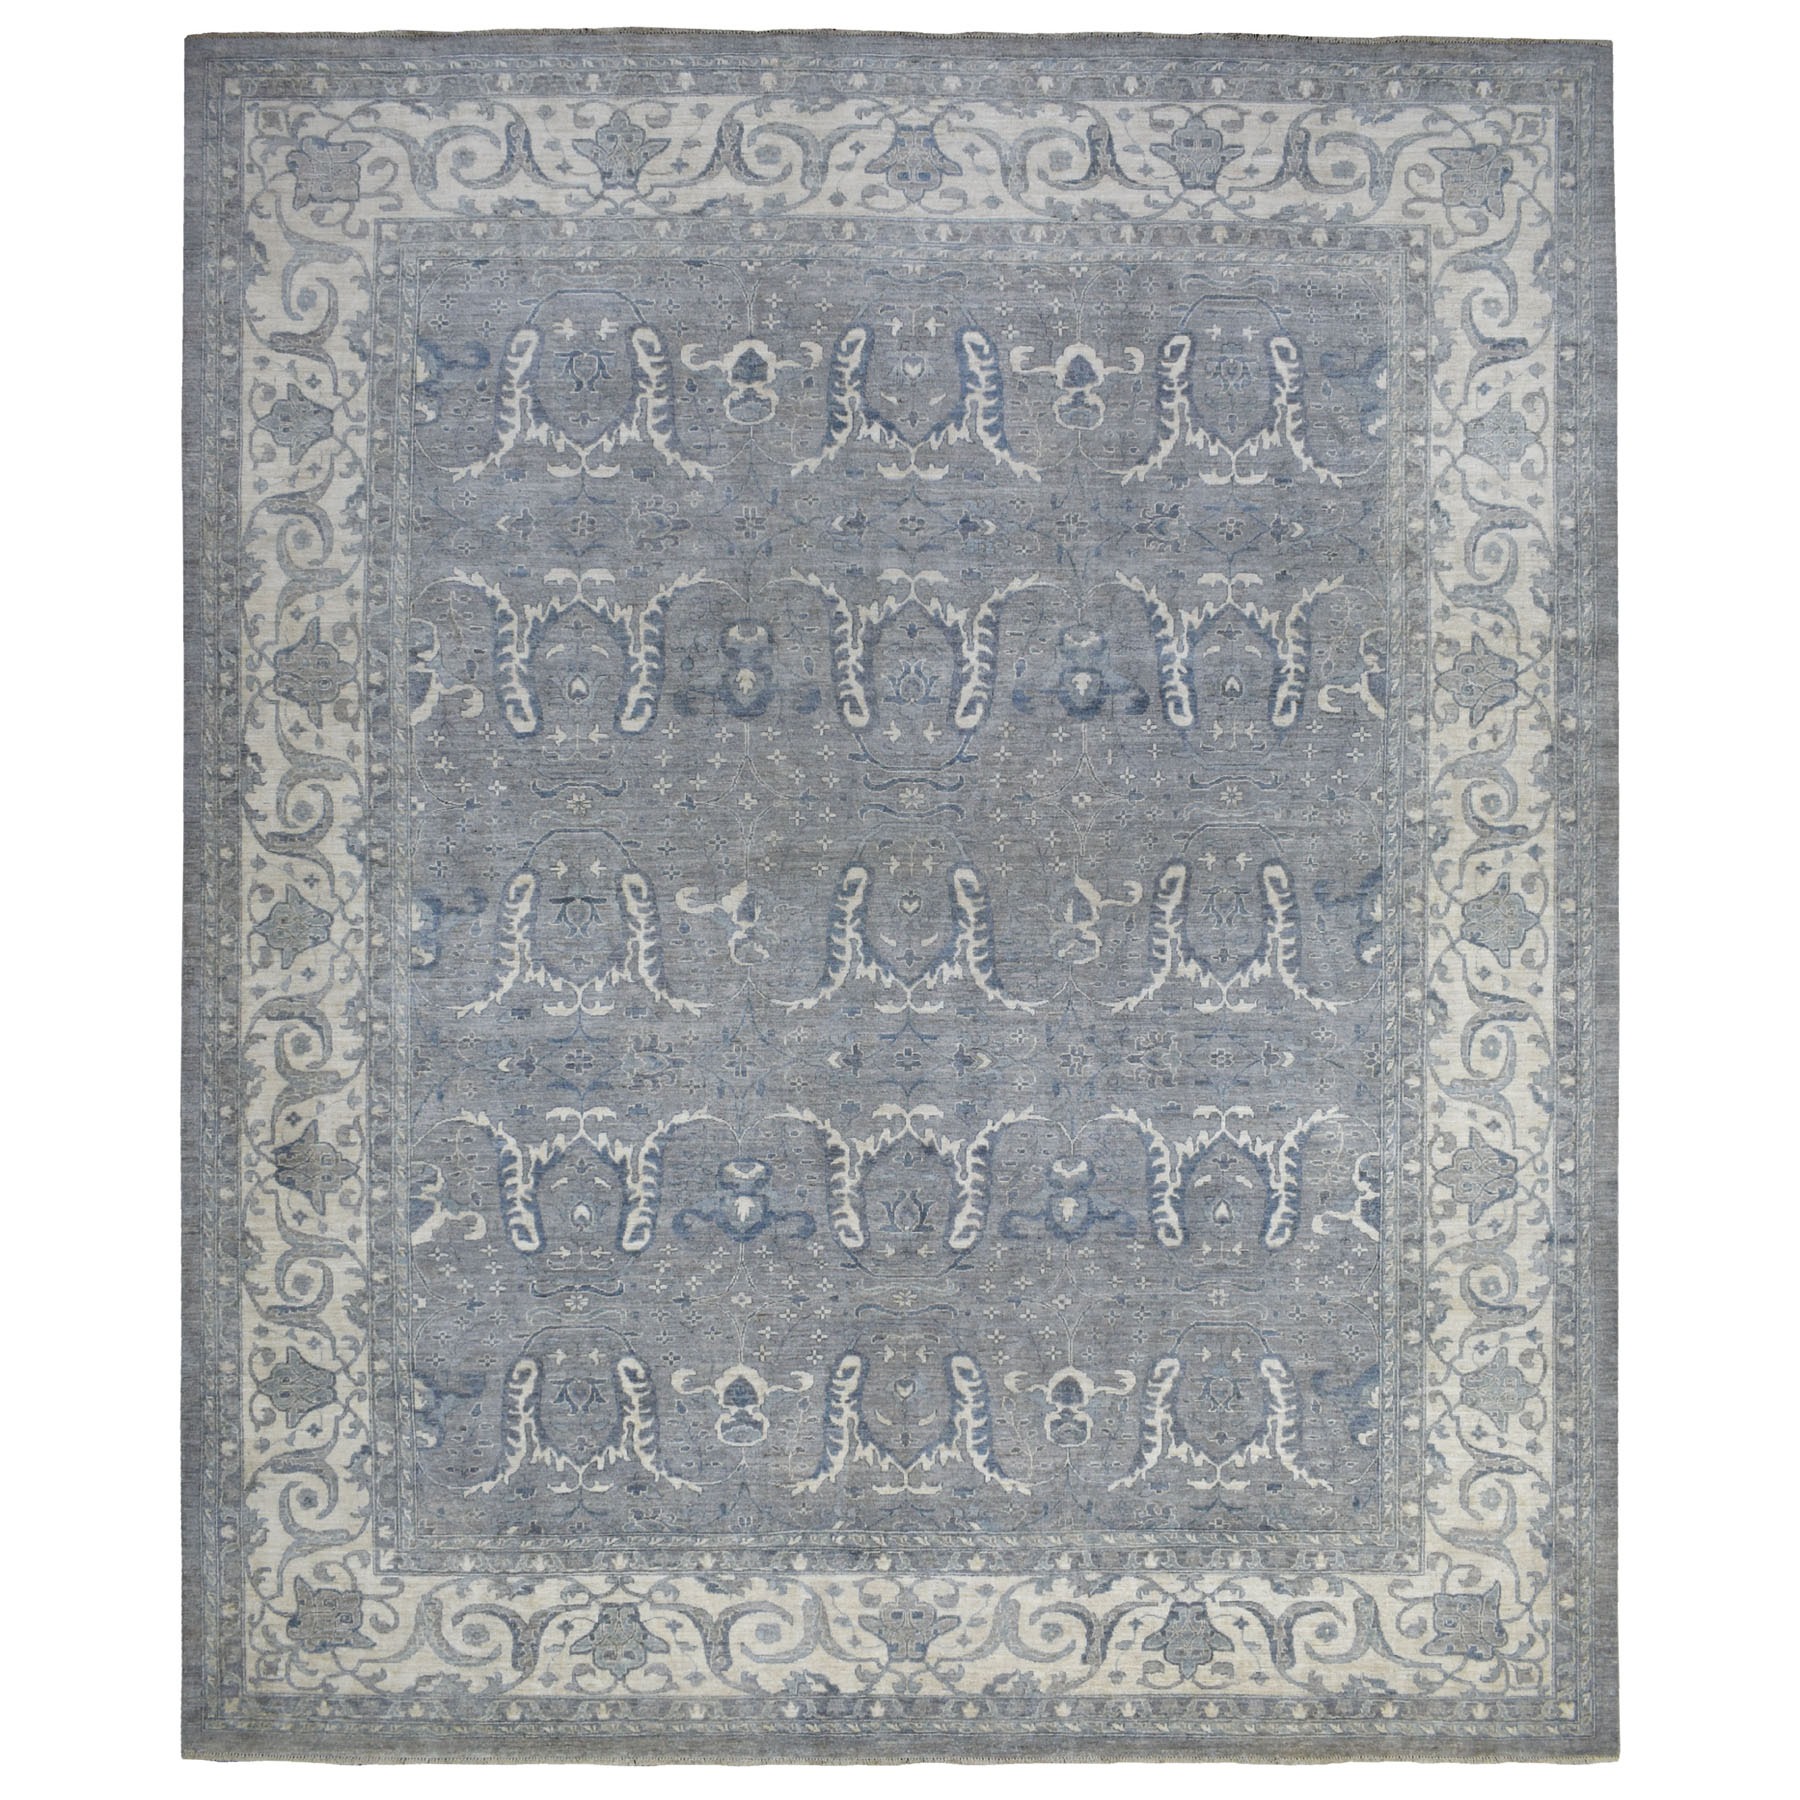 Agra And Turkish Collection Hand Knotted Grey Rug No: 1134168